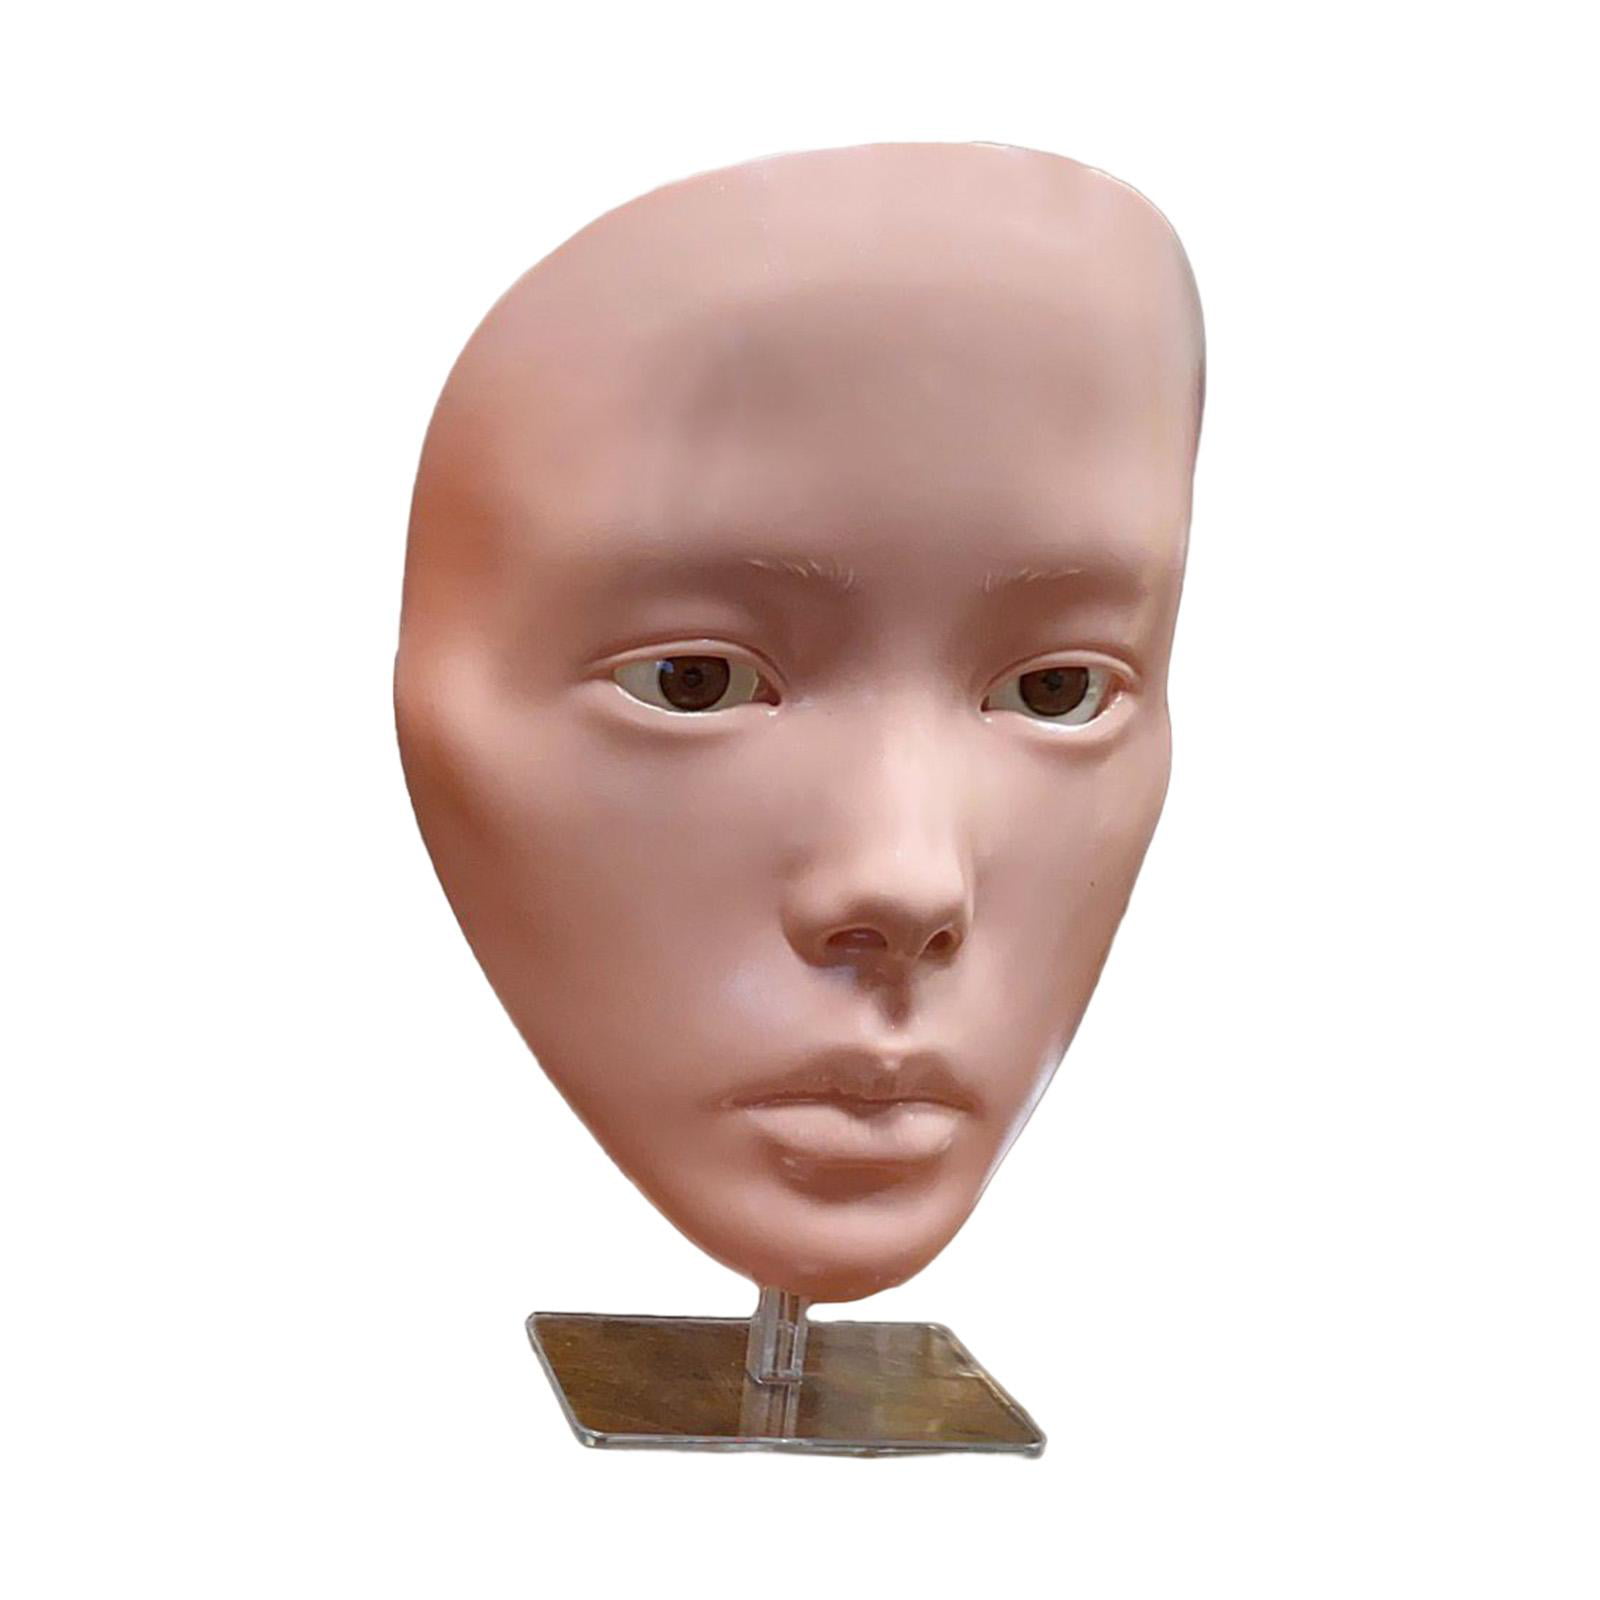 Salon Hair Makeup Practice Model Eyelash Extensions Mannequin Head  Hairdresser Training Head Doll 60cm Wig Head Without Holder SH190727 From  Lizhang01, $20.11